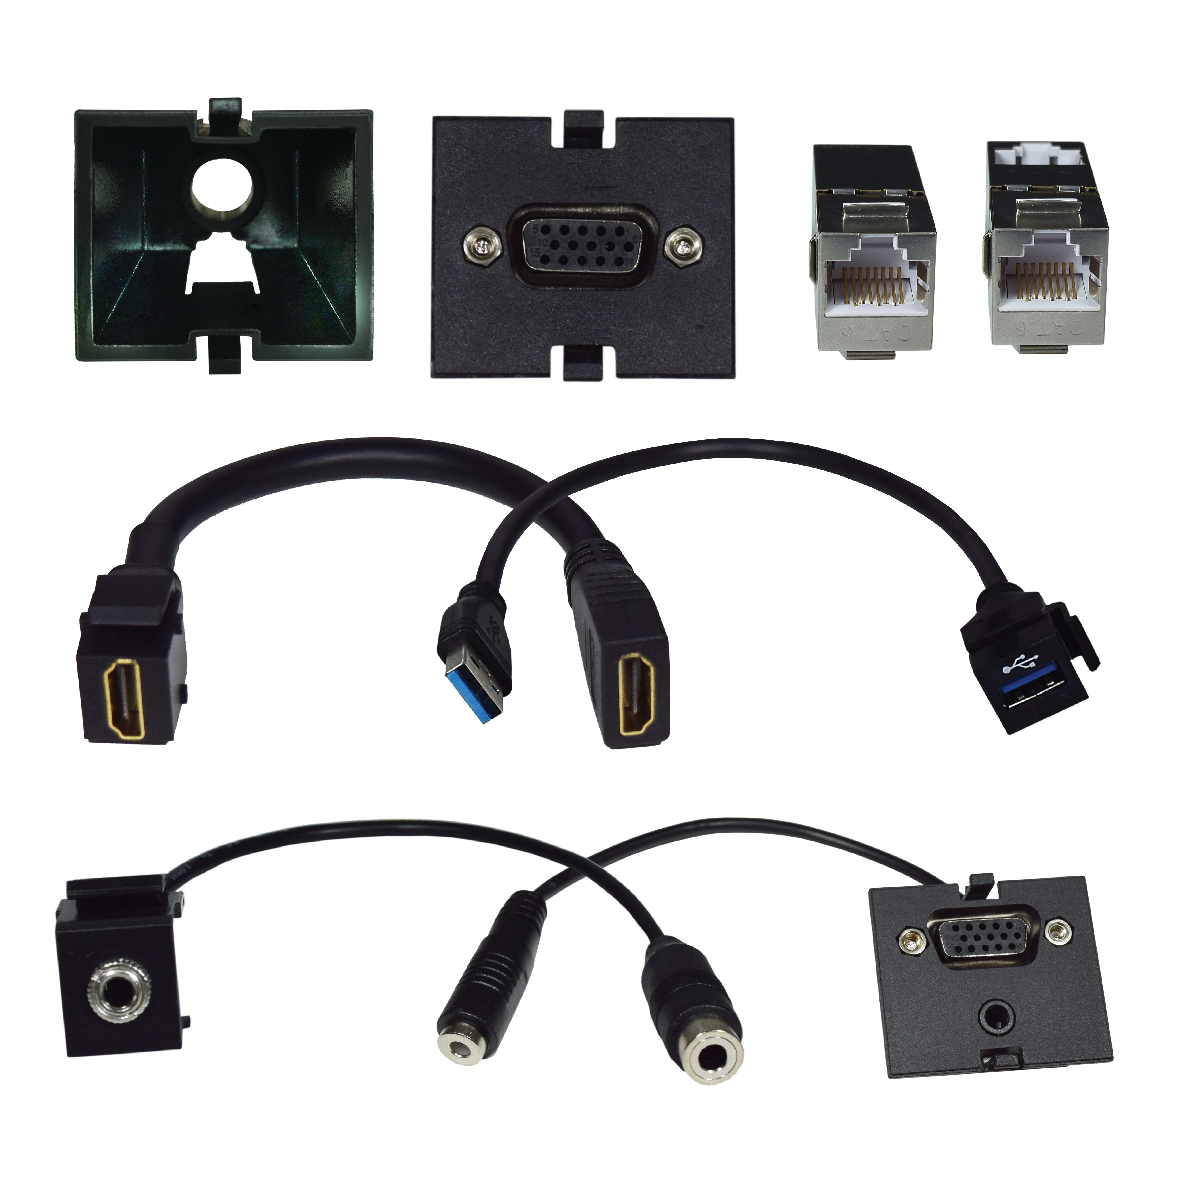 components & accessories